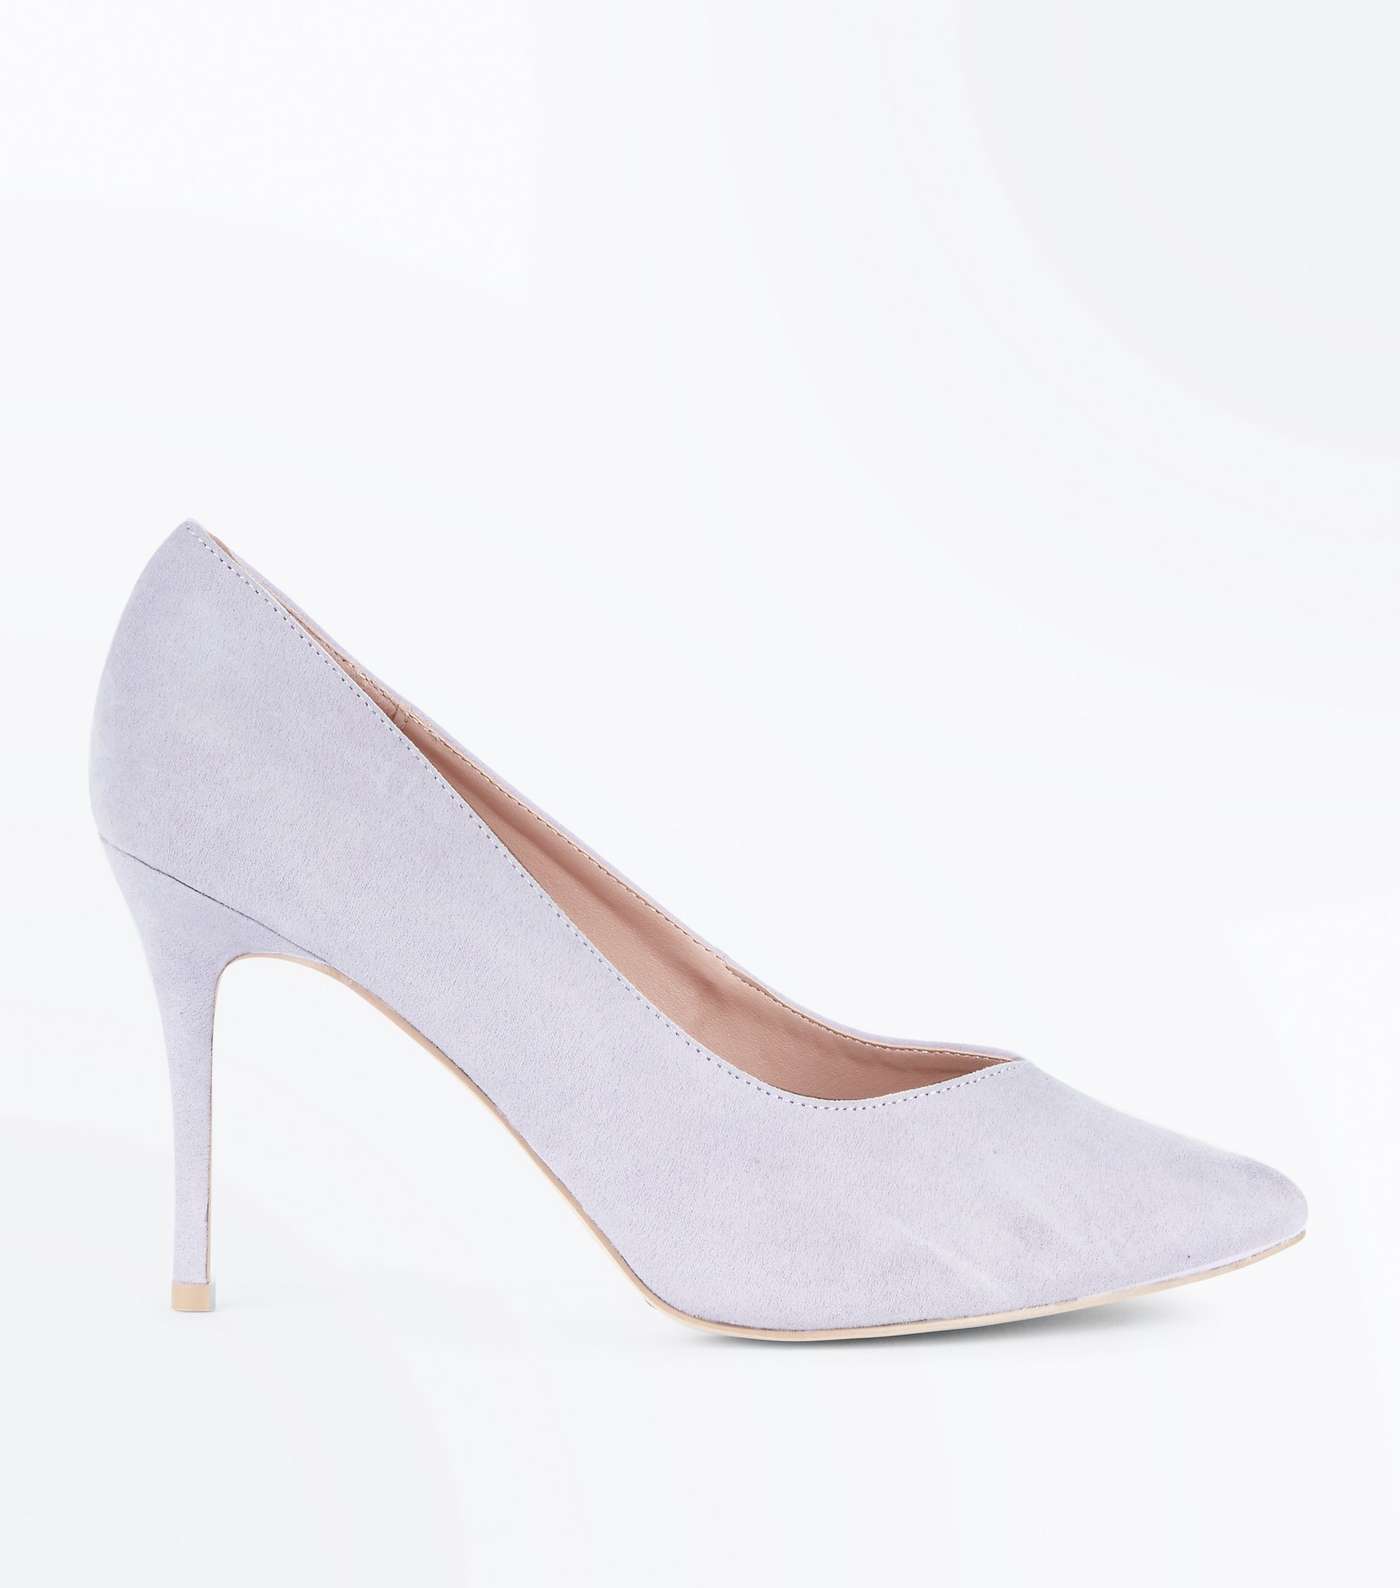 Lilac Sweetheart Pointed Court Shoes